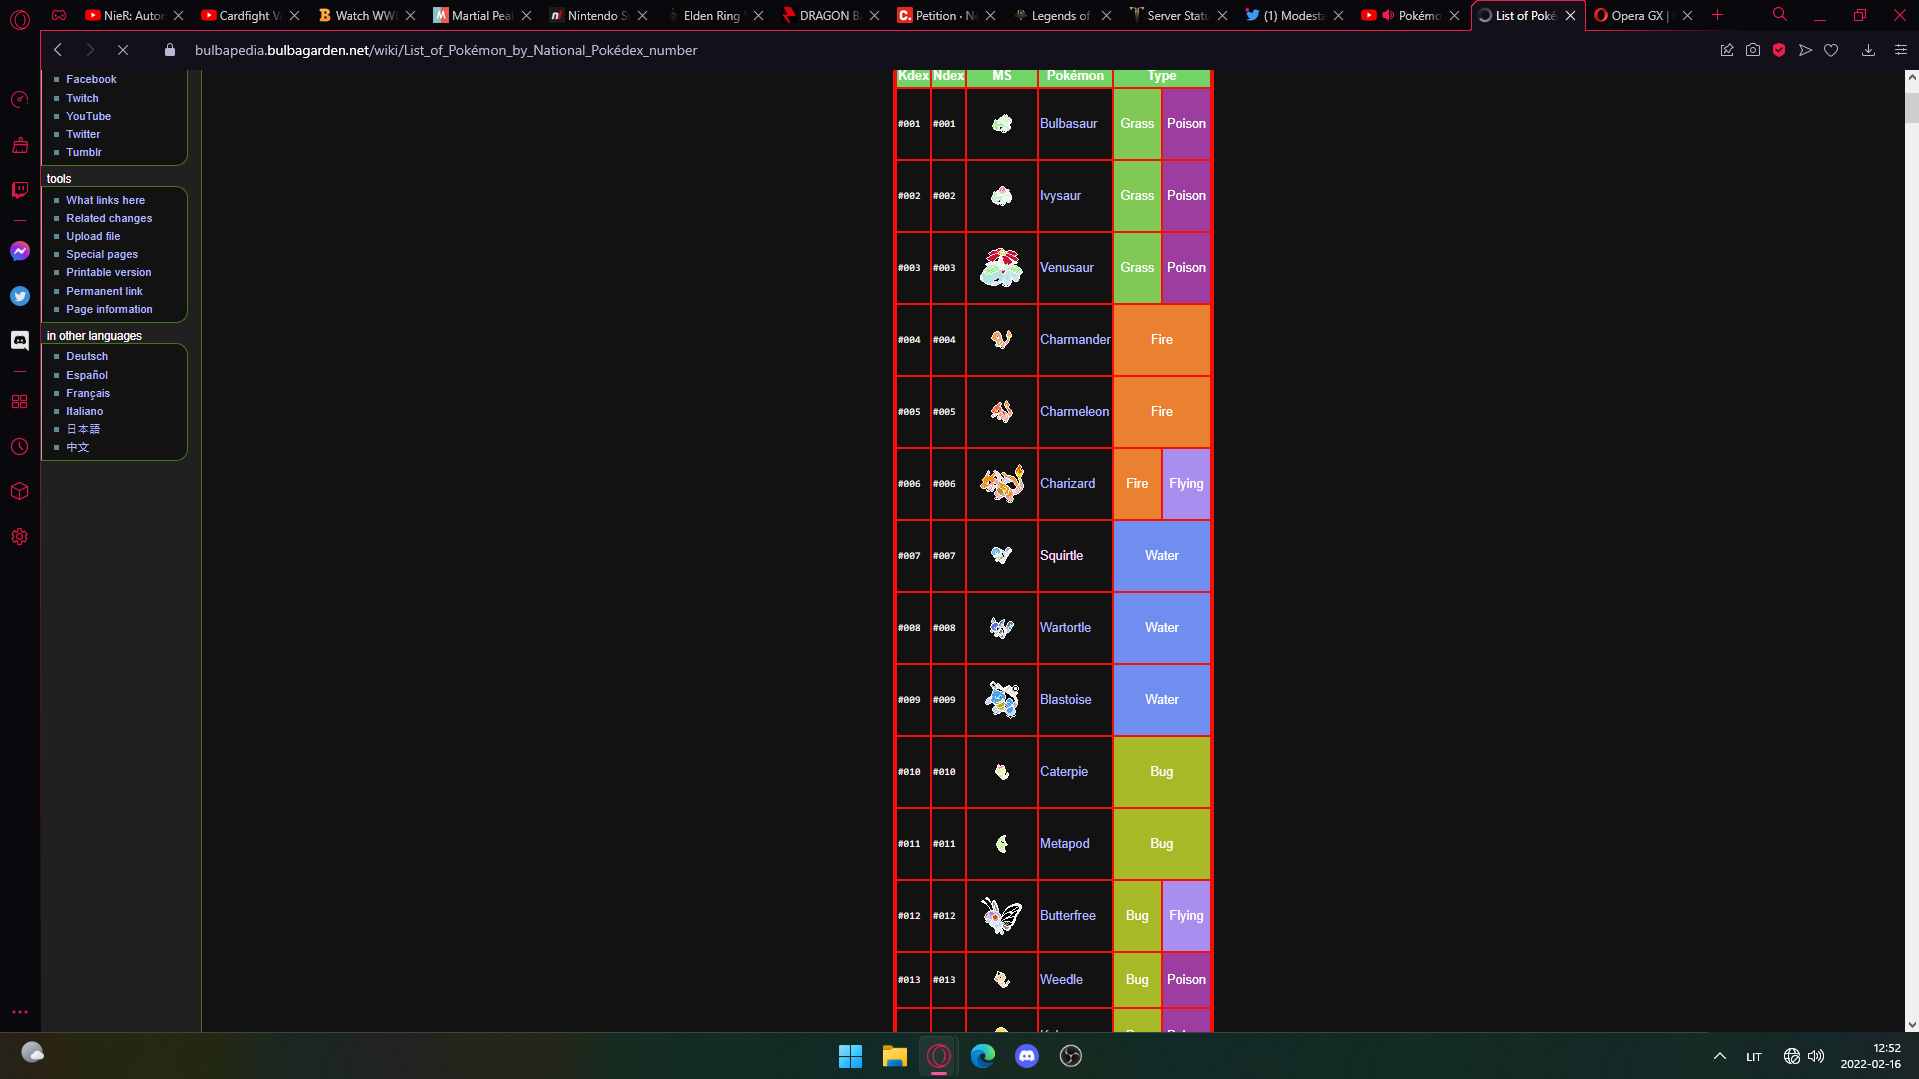 Shadows and colors are inverted on roblox website (only on opera GX, force  dark mode is off, only on some profile avatars and profile items.) : r/ OperaGX